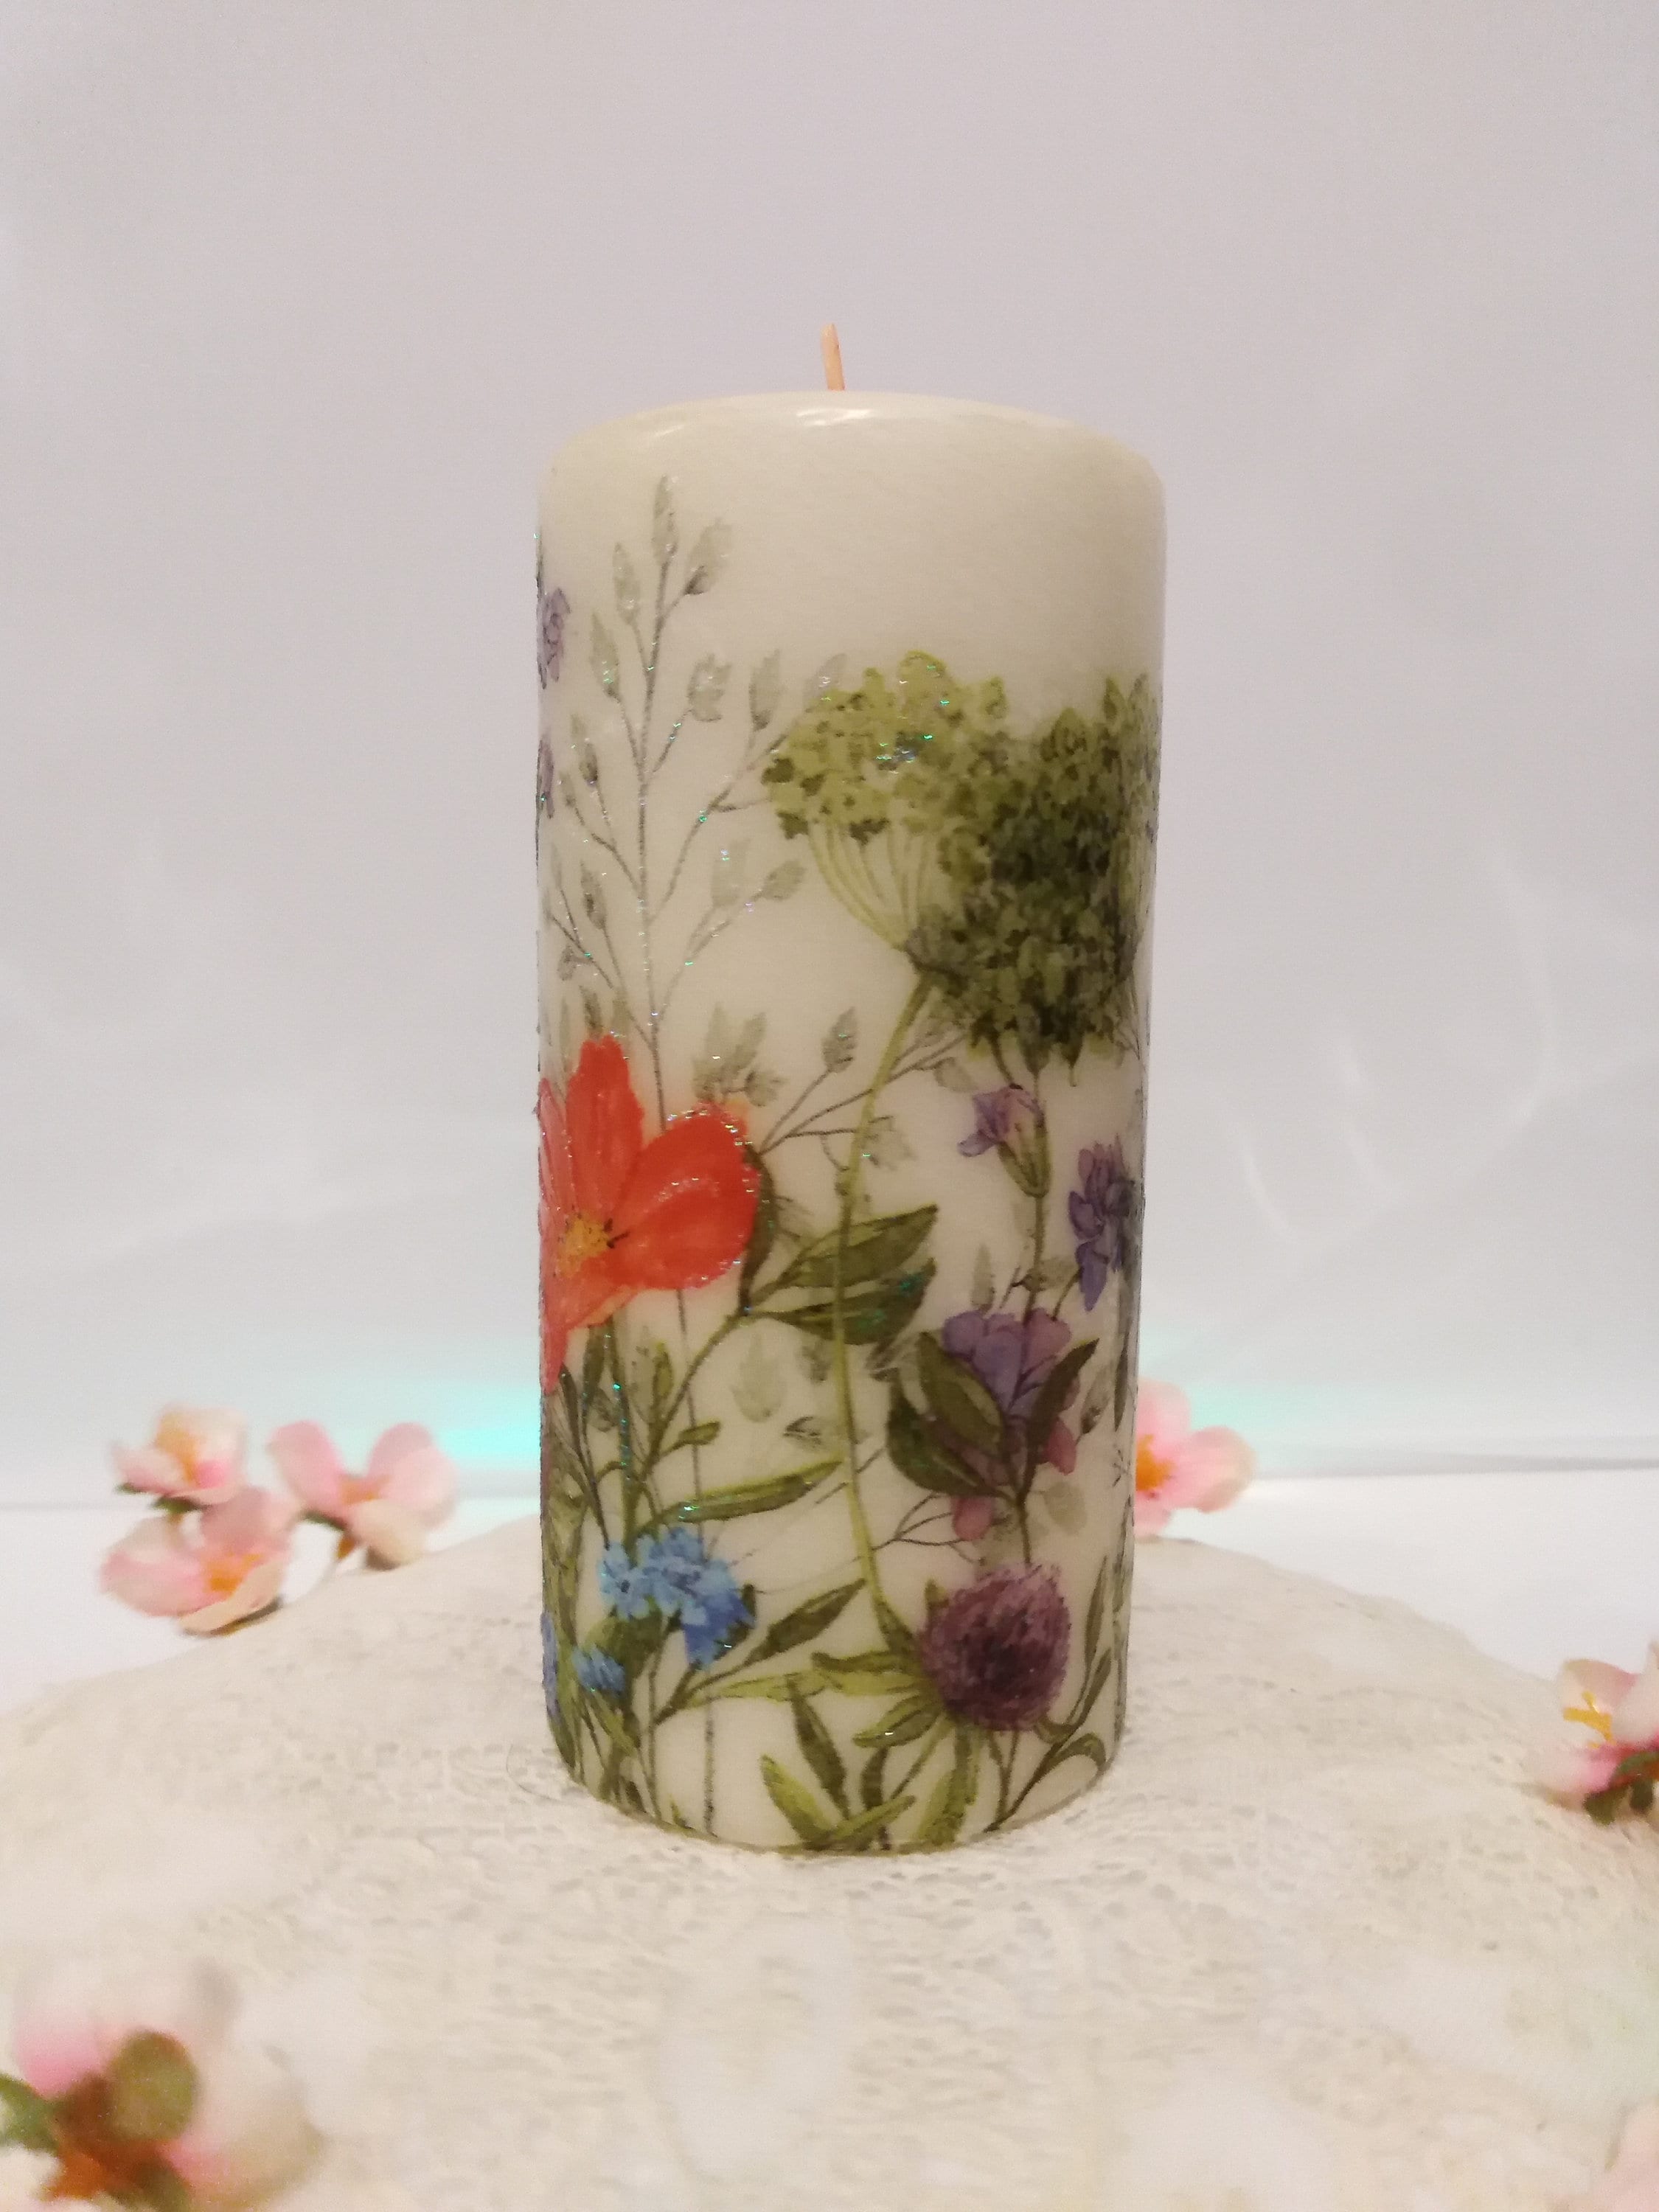 DIY Decoupaged Candle with Dried Flower  Candles crafts, Dried flowers,  Candle decor